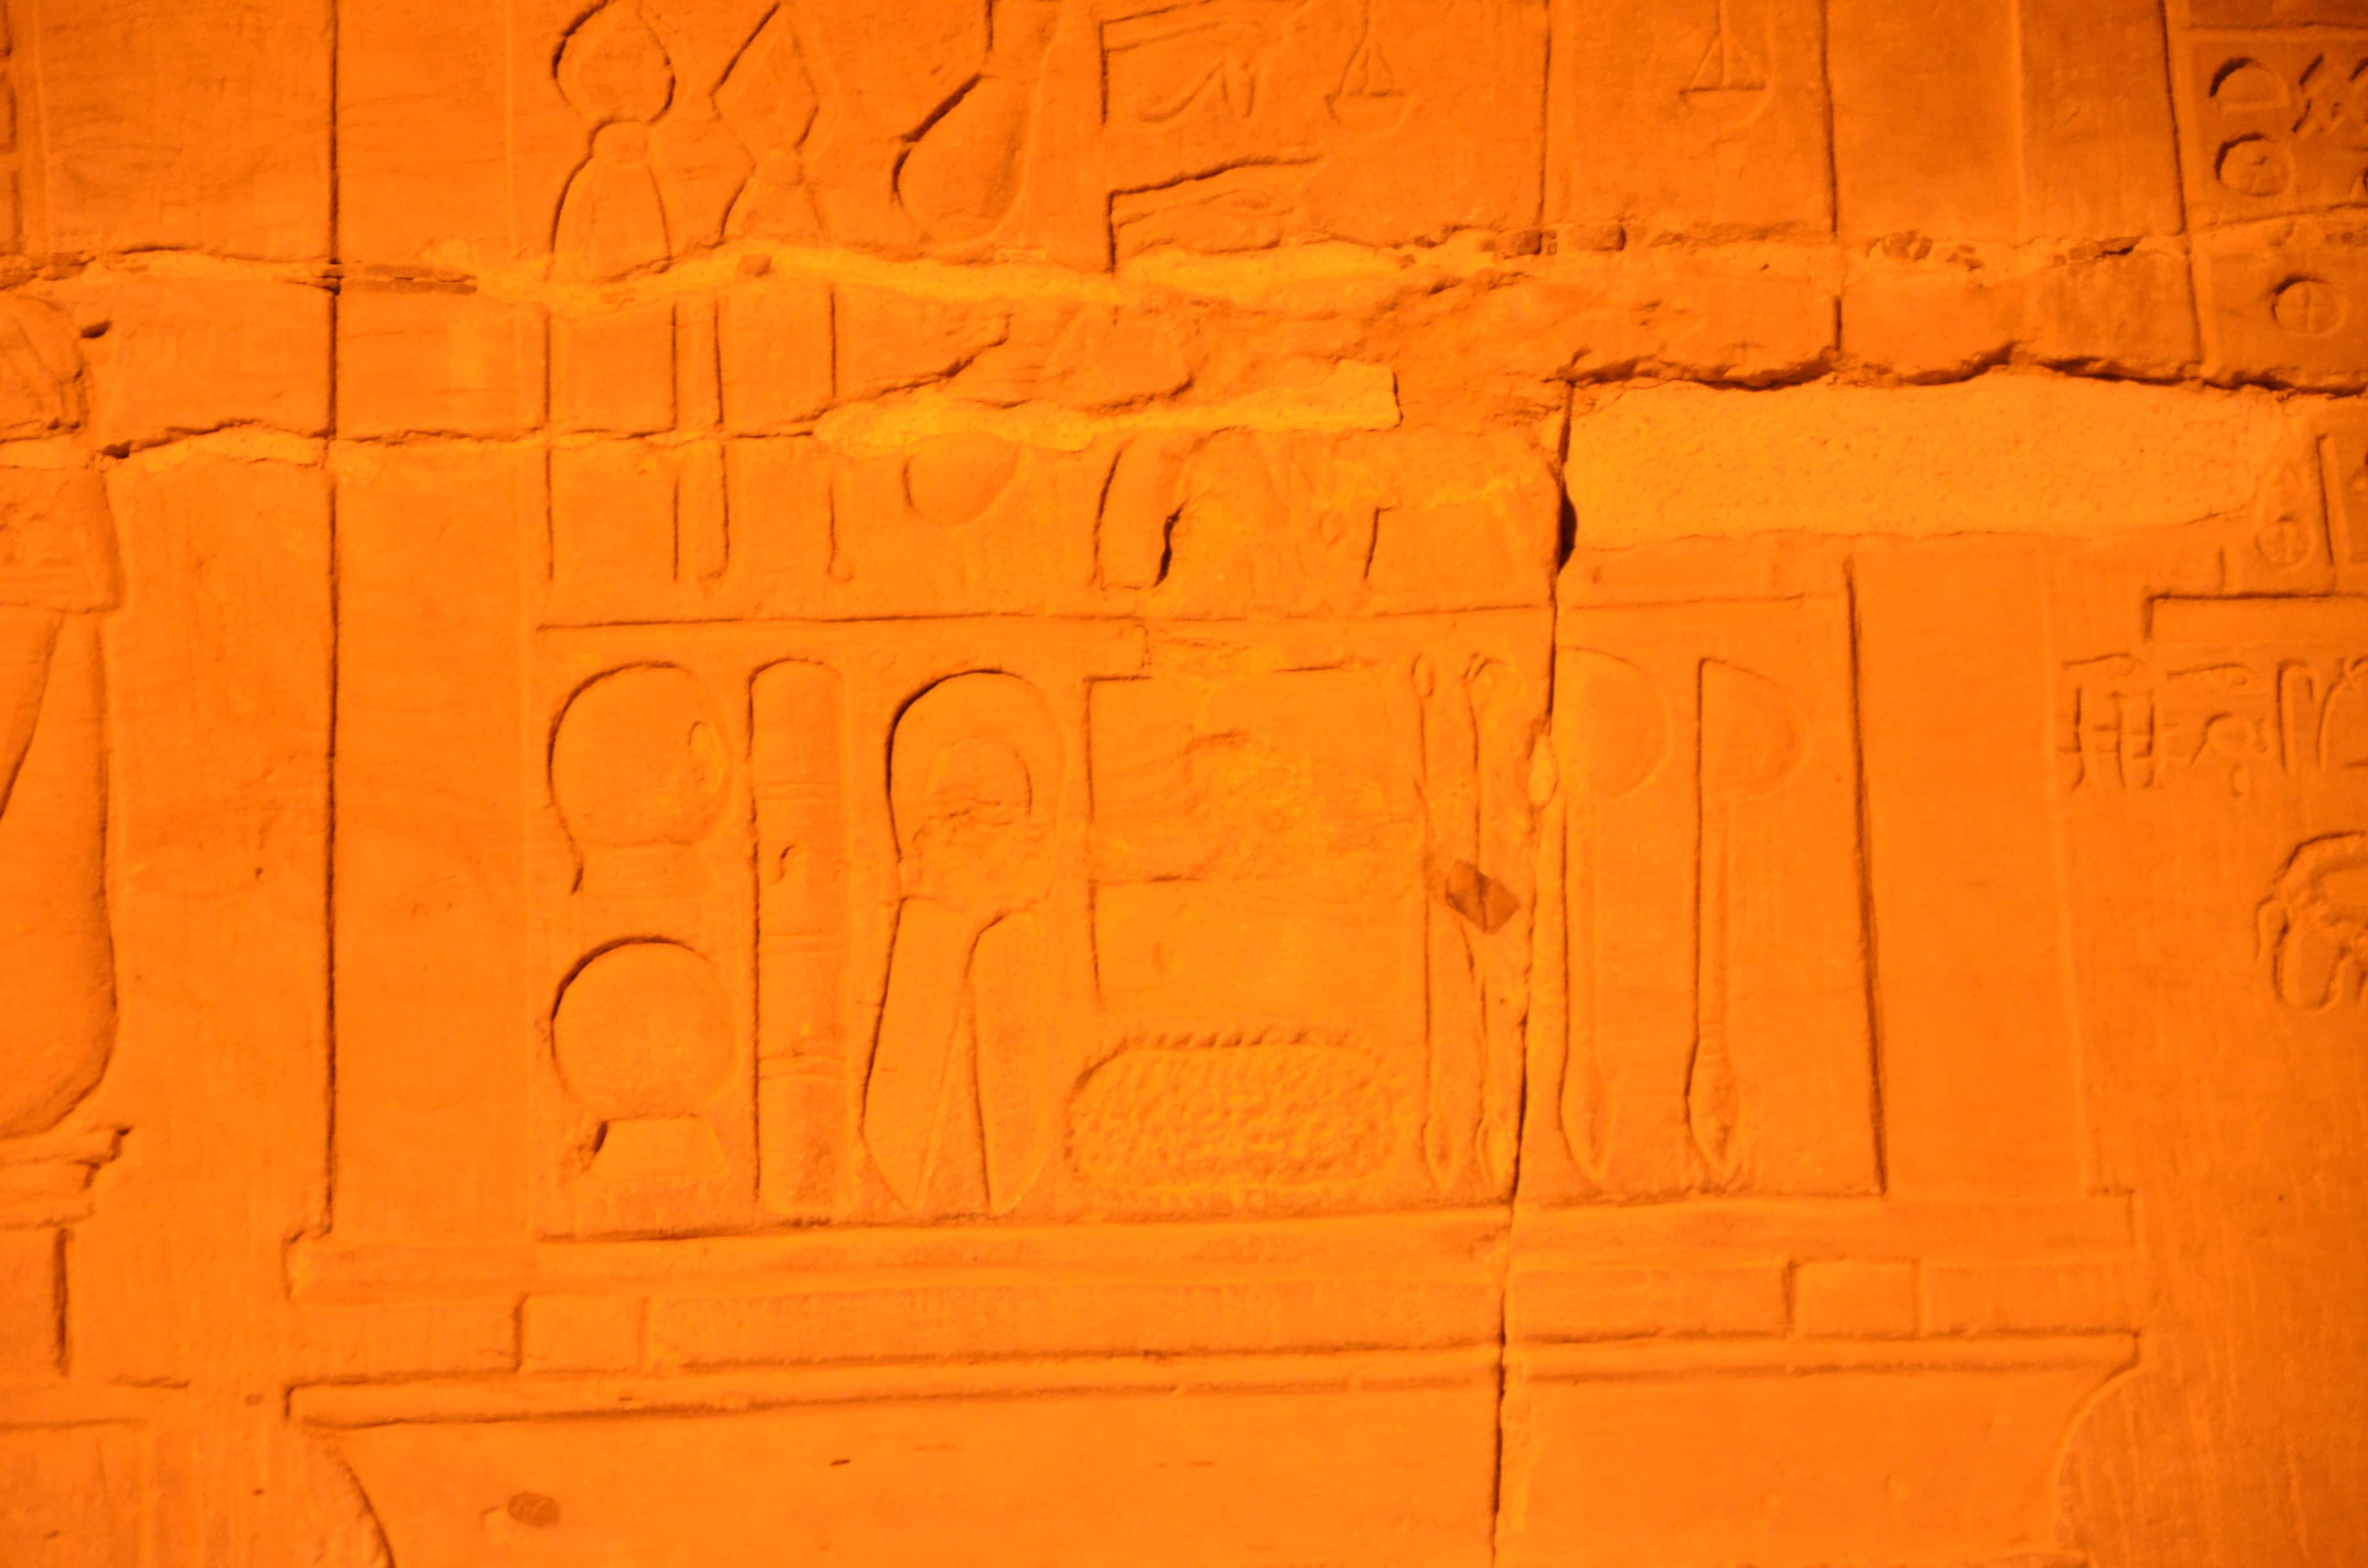 Hieroglyphics showing medical tools at the Temple of Kom Ombo, Egypt